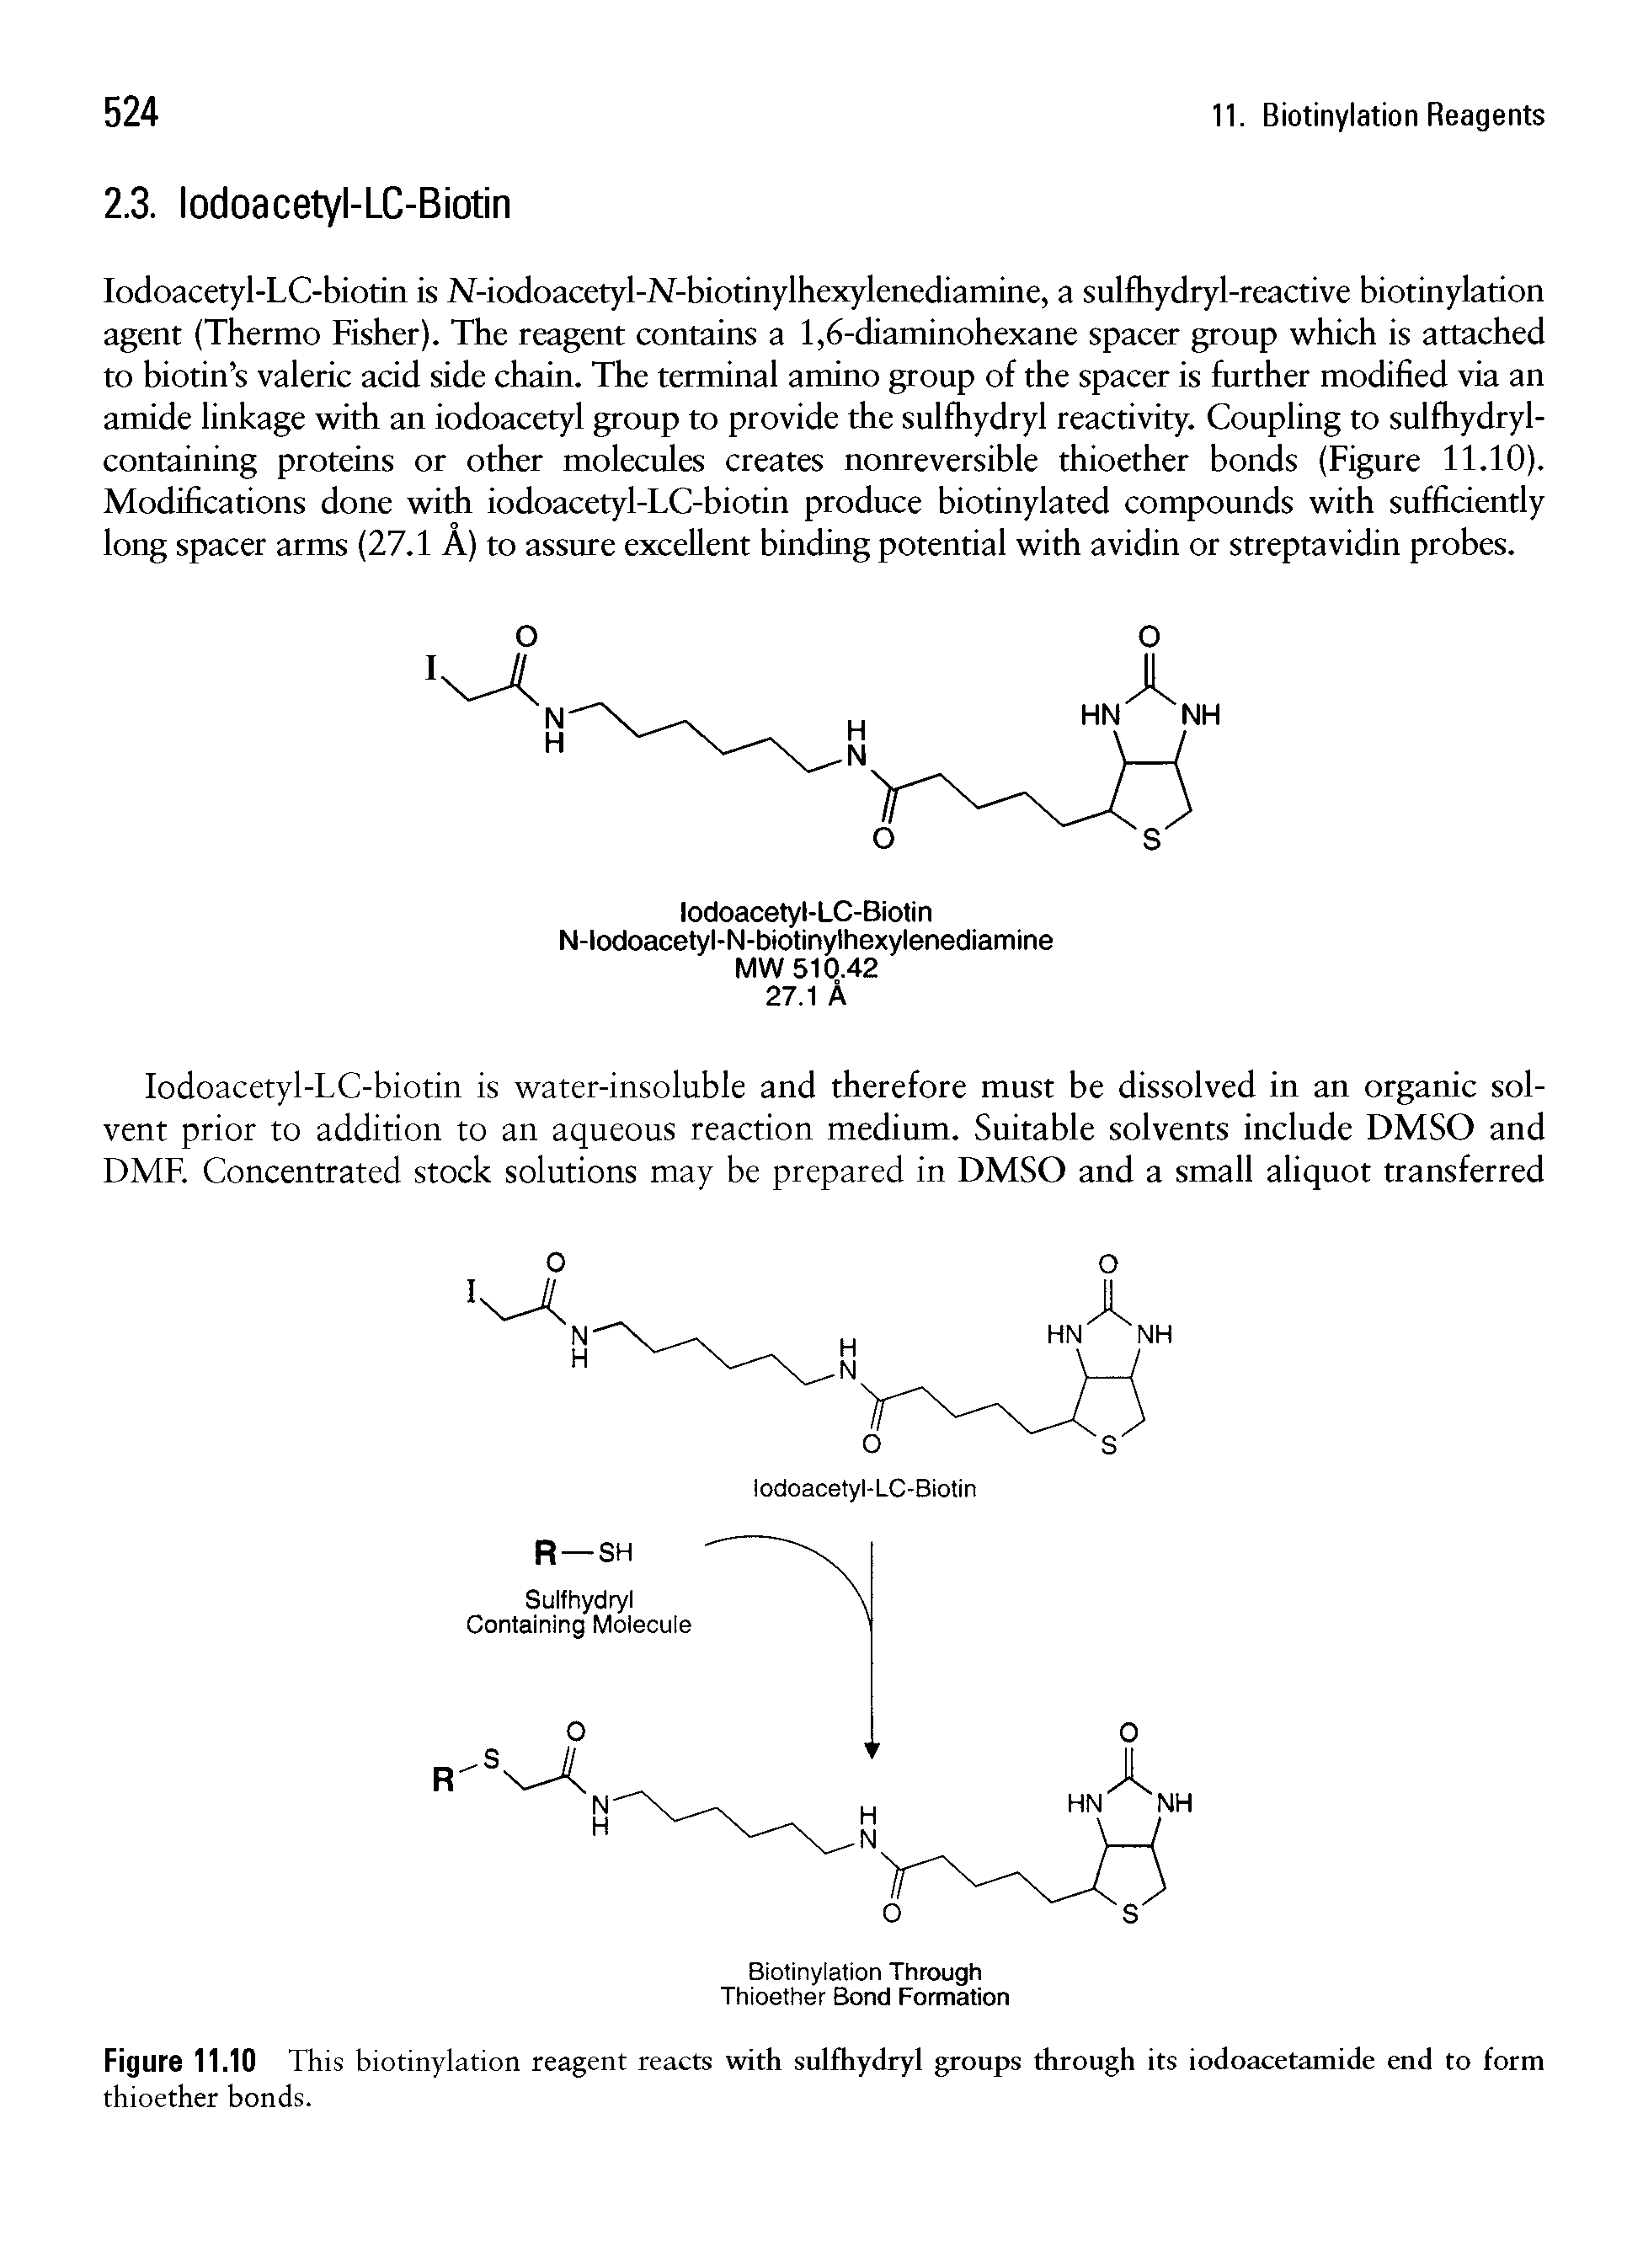 Figure 11.10 This biotinylation reagent reacts with sulfhydryl groups through its iodoacetamide end to form thioether bonds.